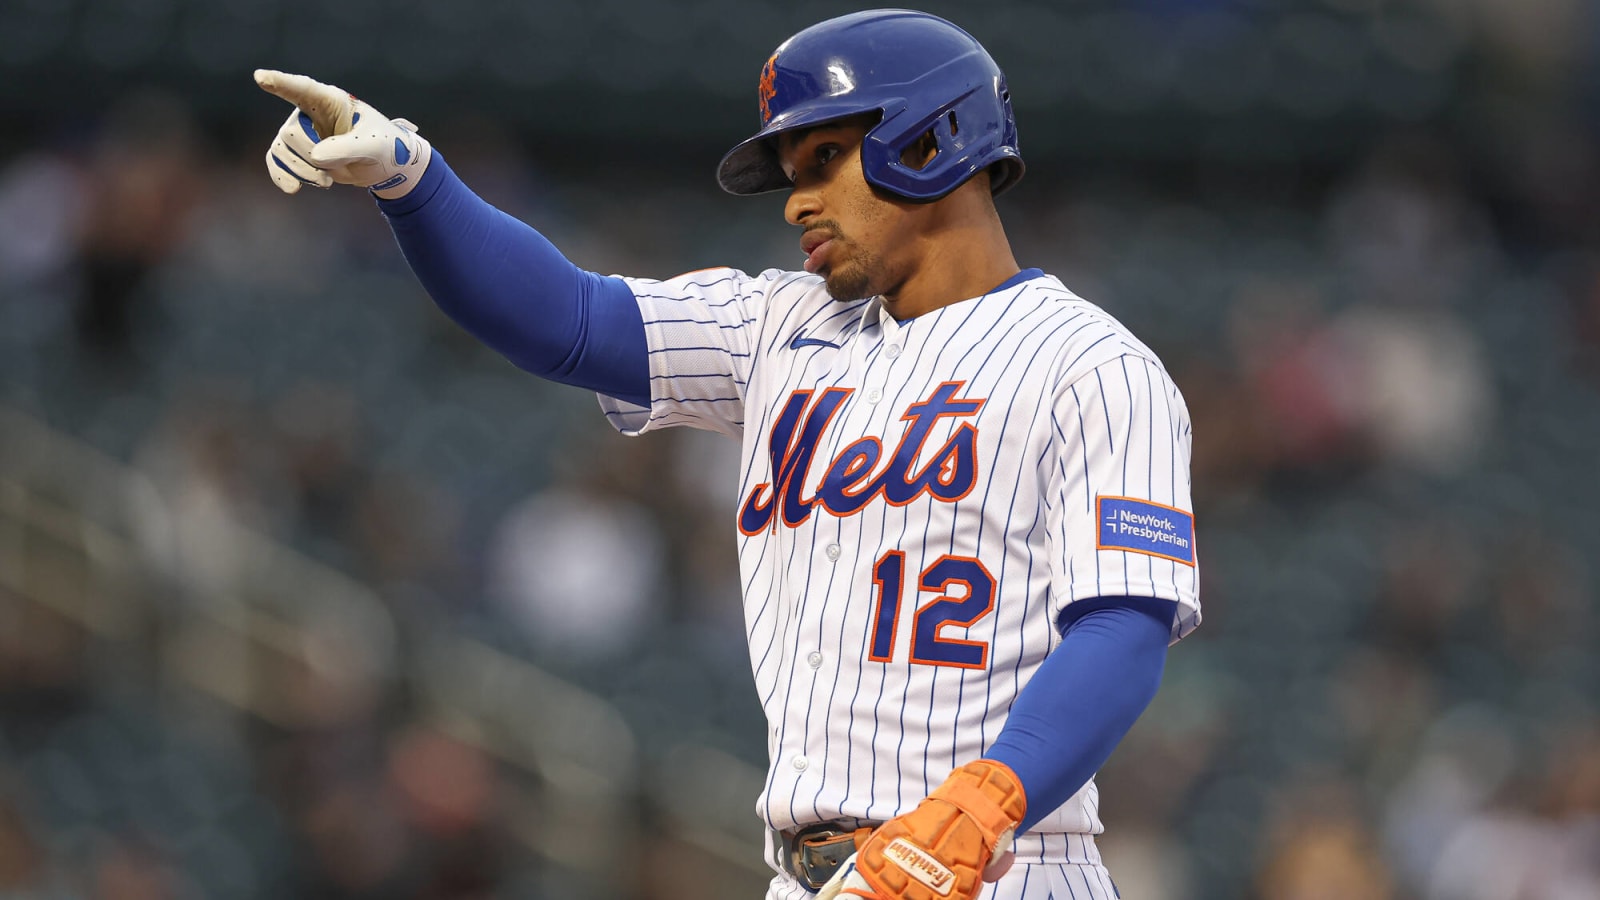 Mets star SS undergoes elbow surgery